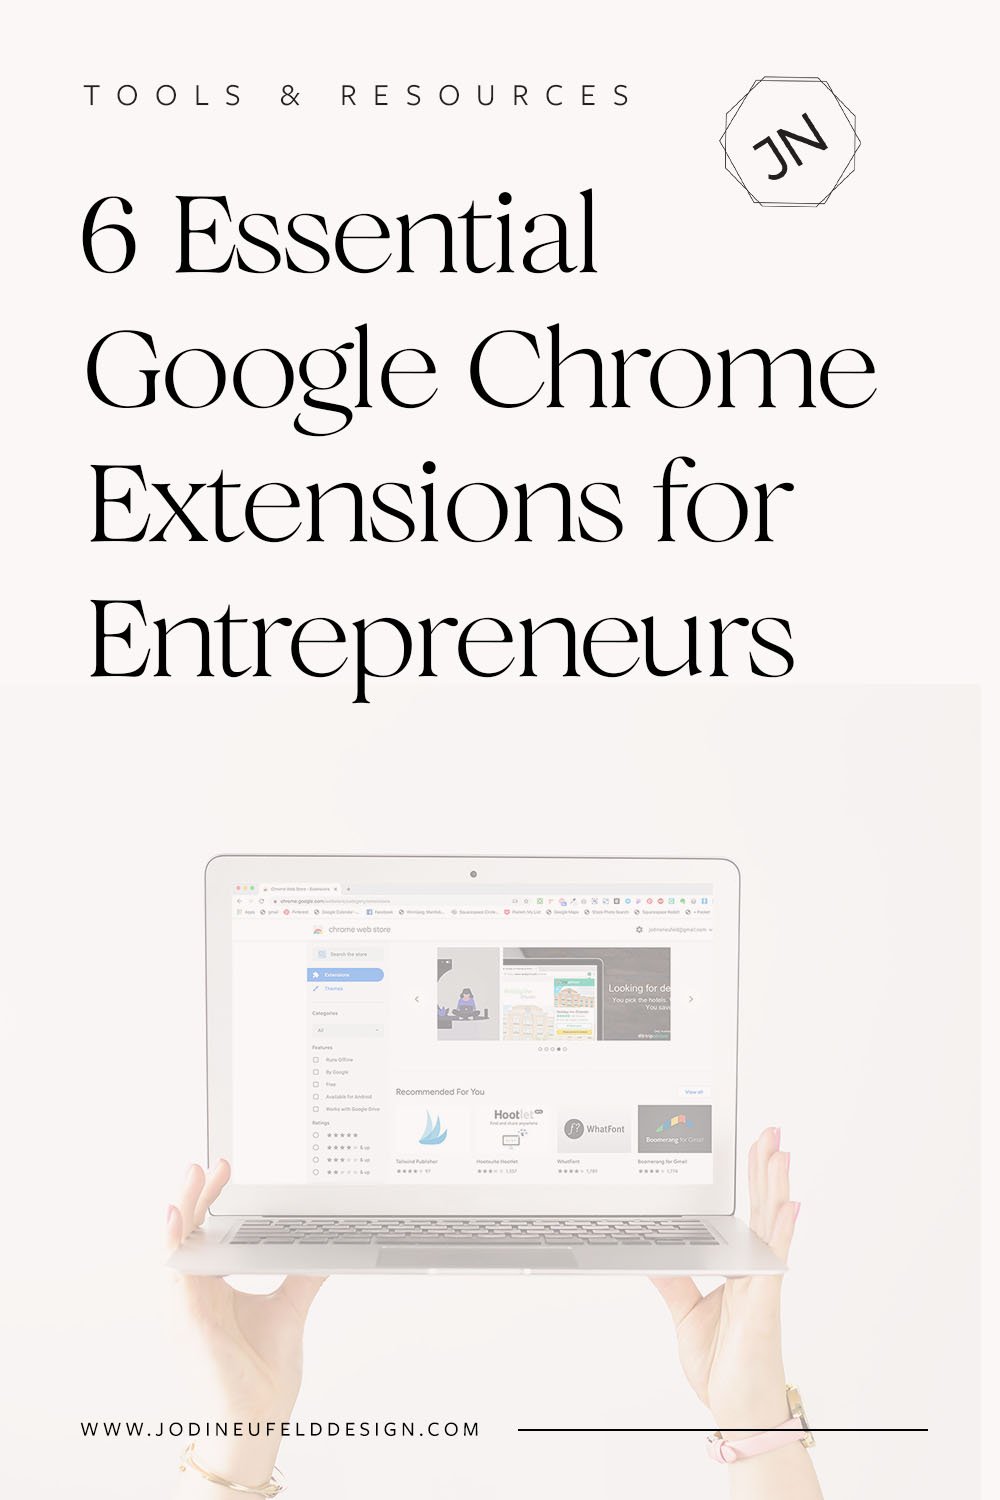 6 Chrome Extensions Every Designer Must Have - The Schedio